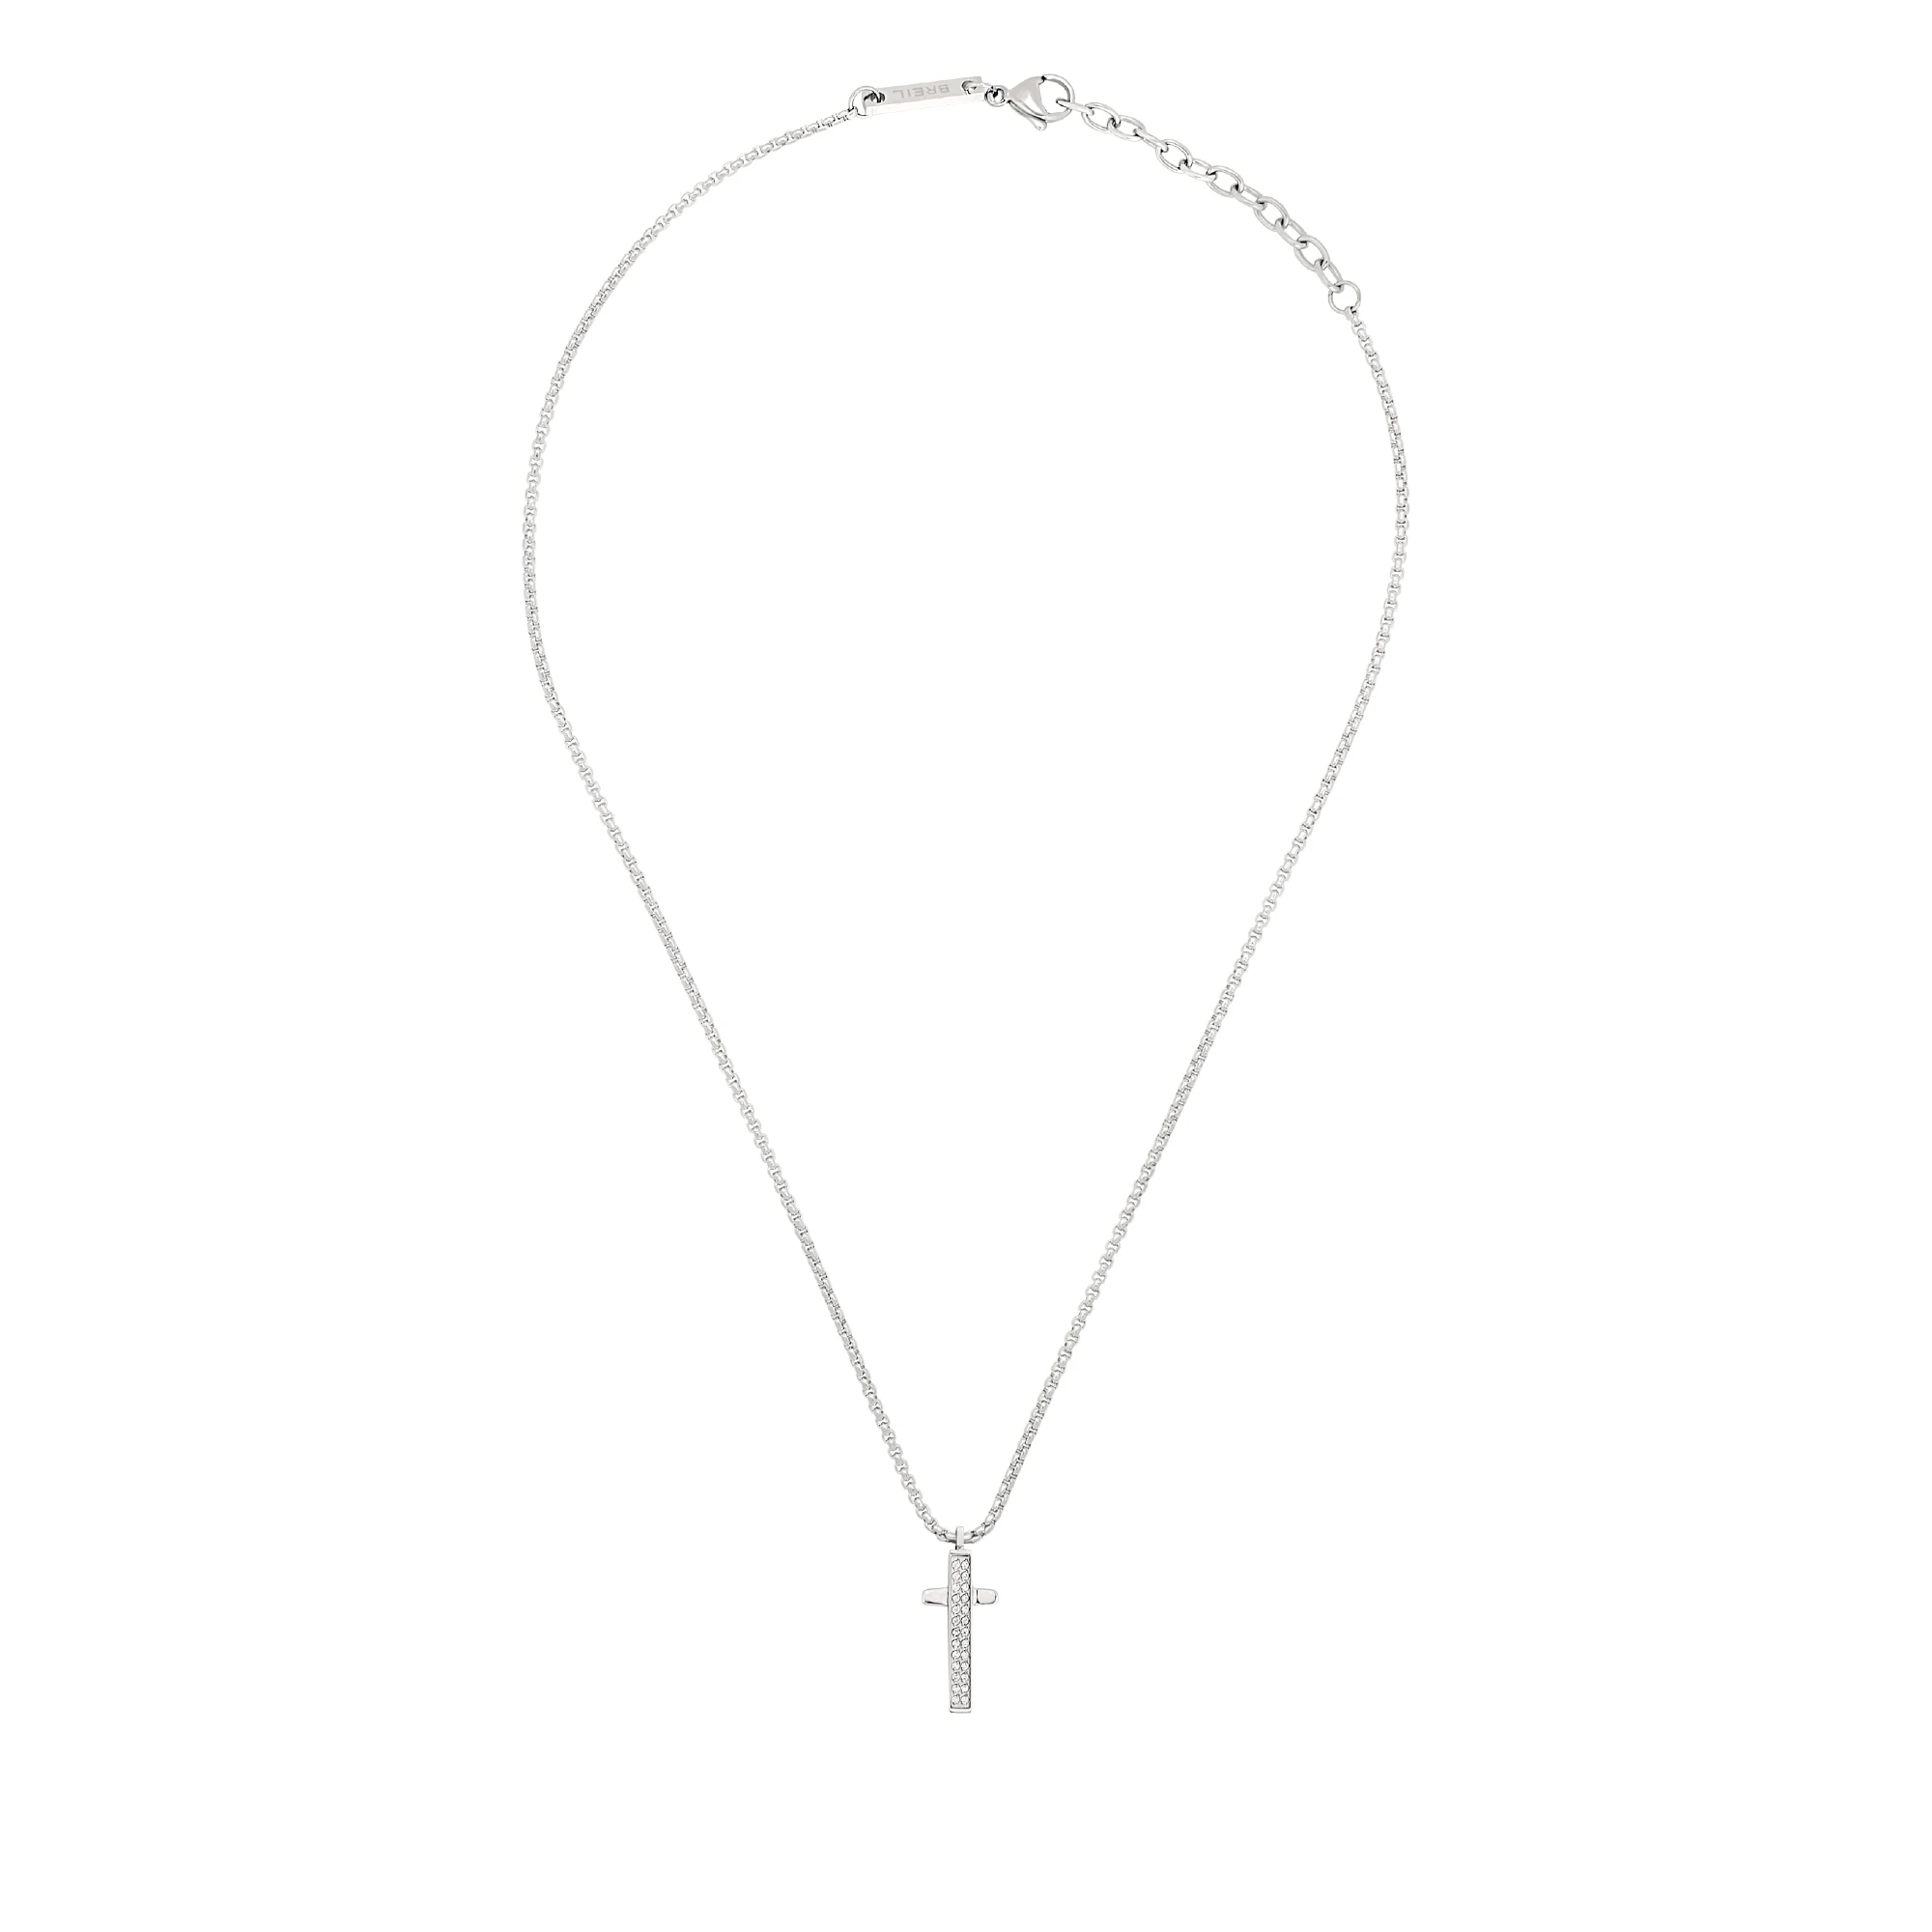 LIGHT ROW - STAINLESS STEEL NECKLACE WITH CUBIC ZIRCONIA - 1 - TJ3360 | Breil